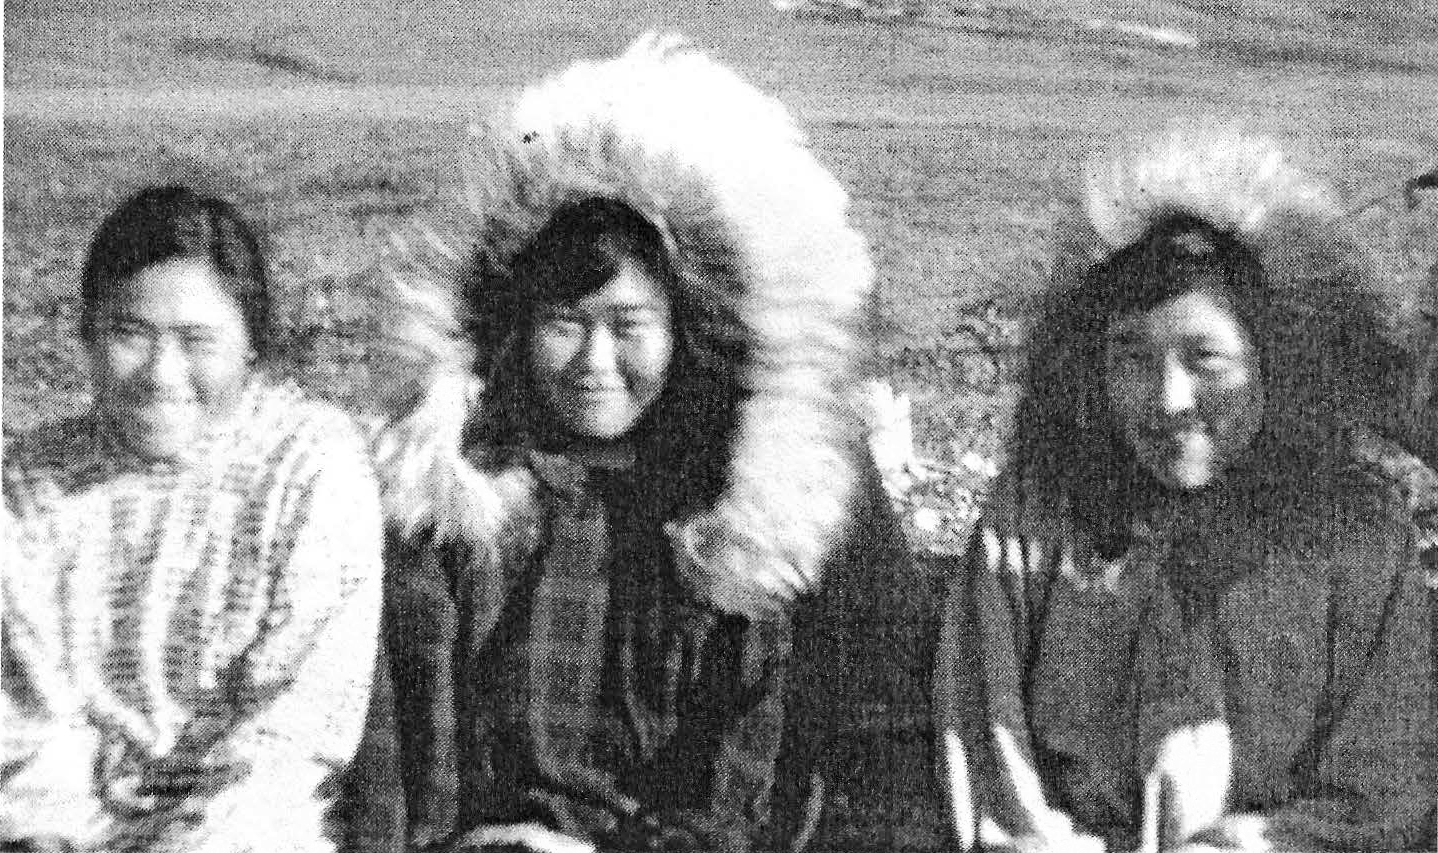 Black-and-white photograph of three young Alaska Native women sitting together